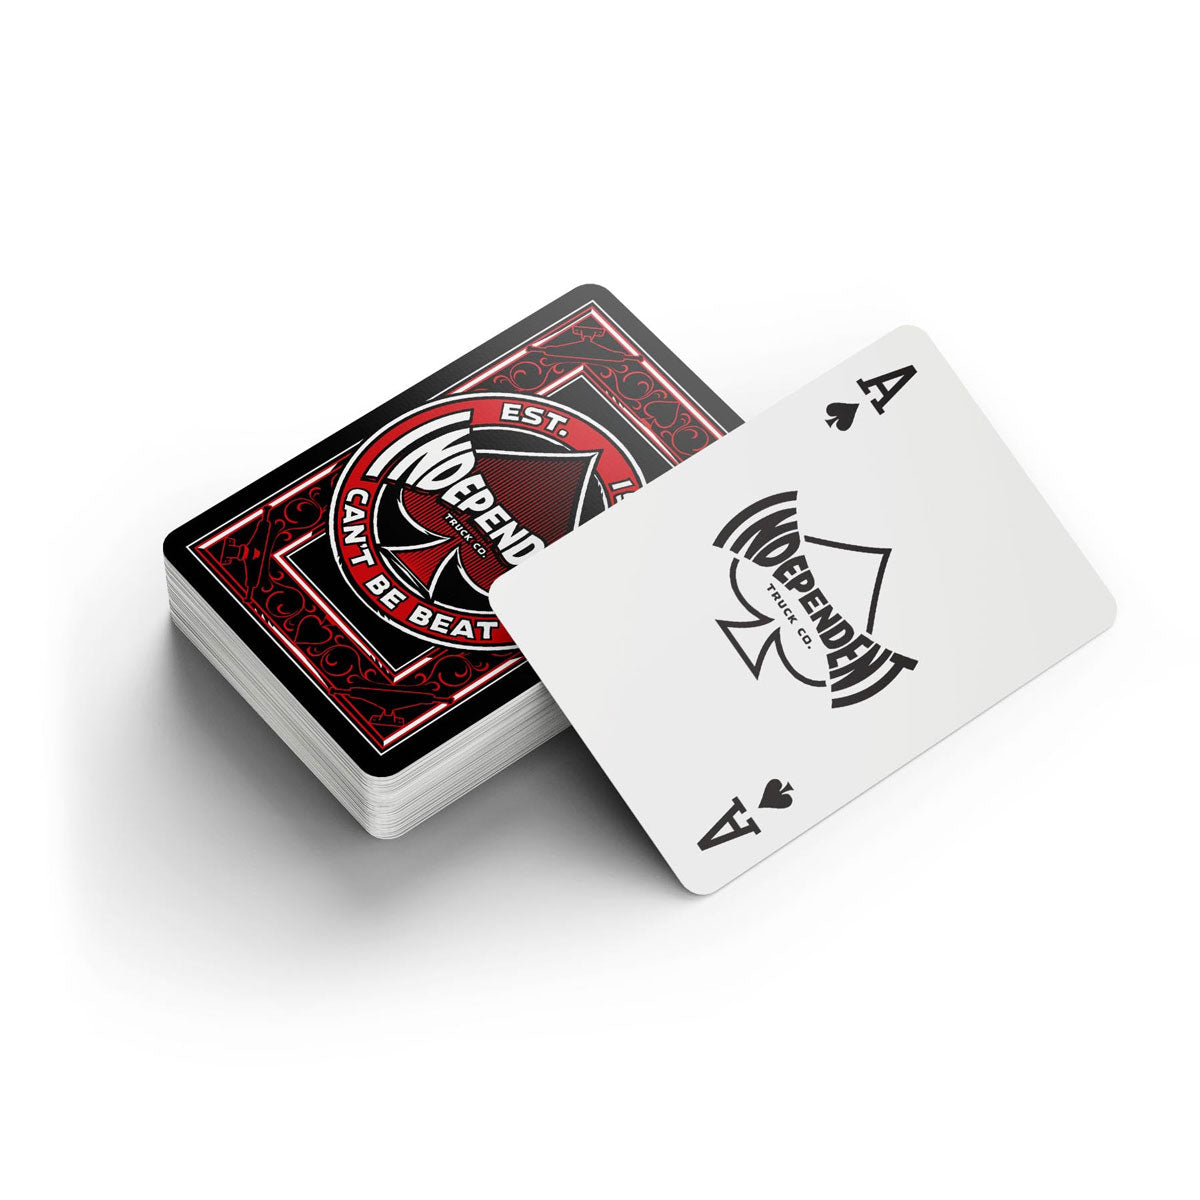 Independent Can't Be Beat Playing Cards - Black/Red image 1